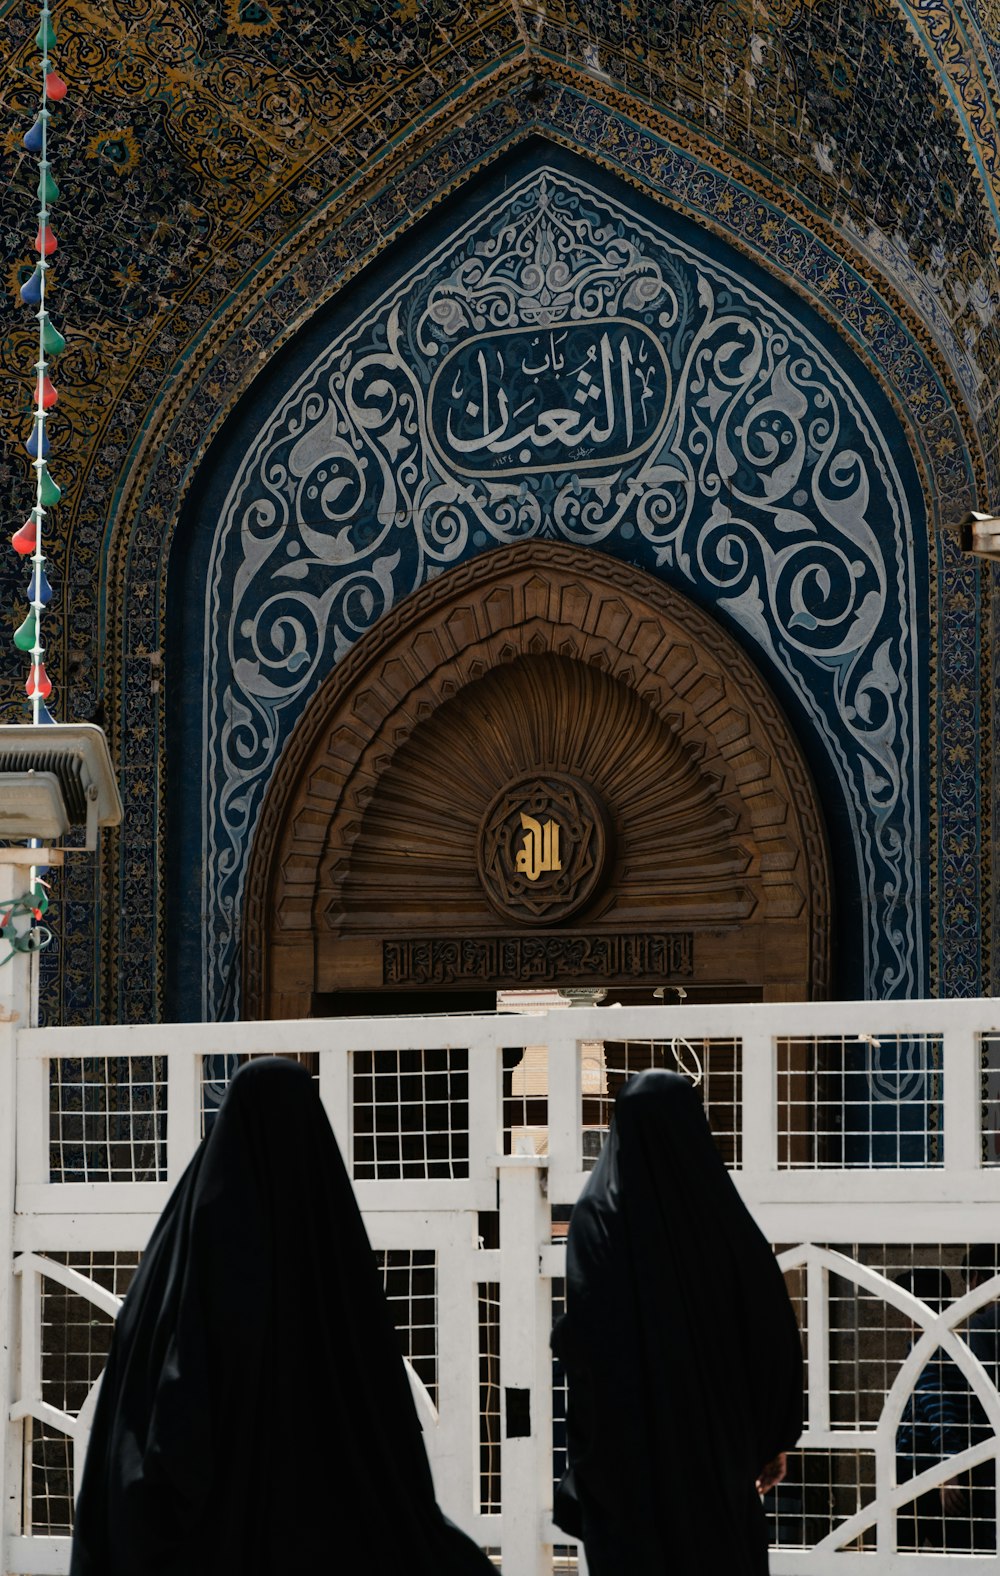 two women in black robes are standing in front of a building